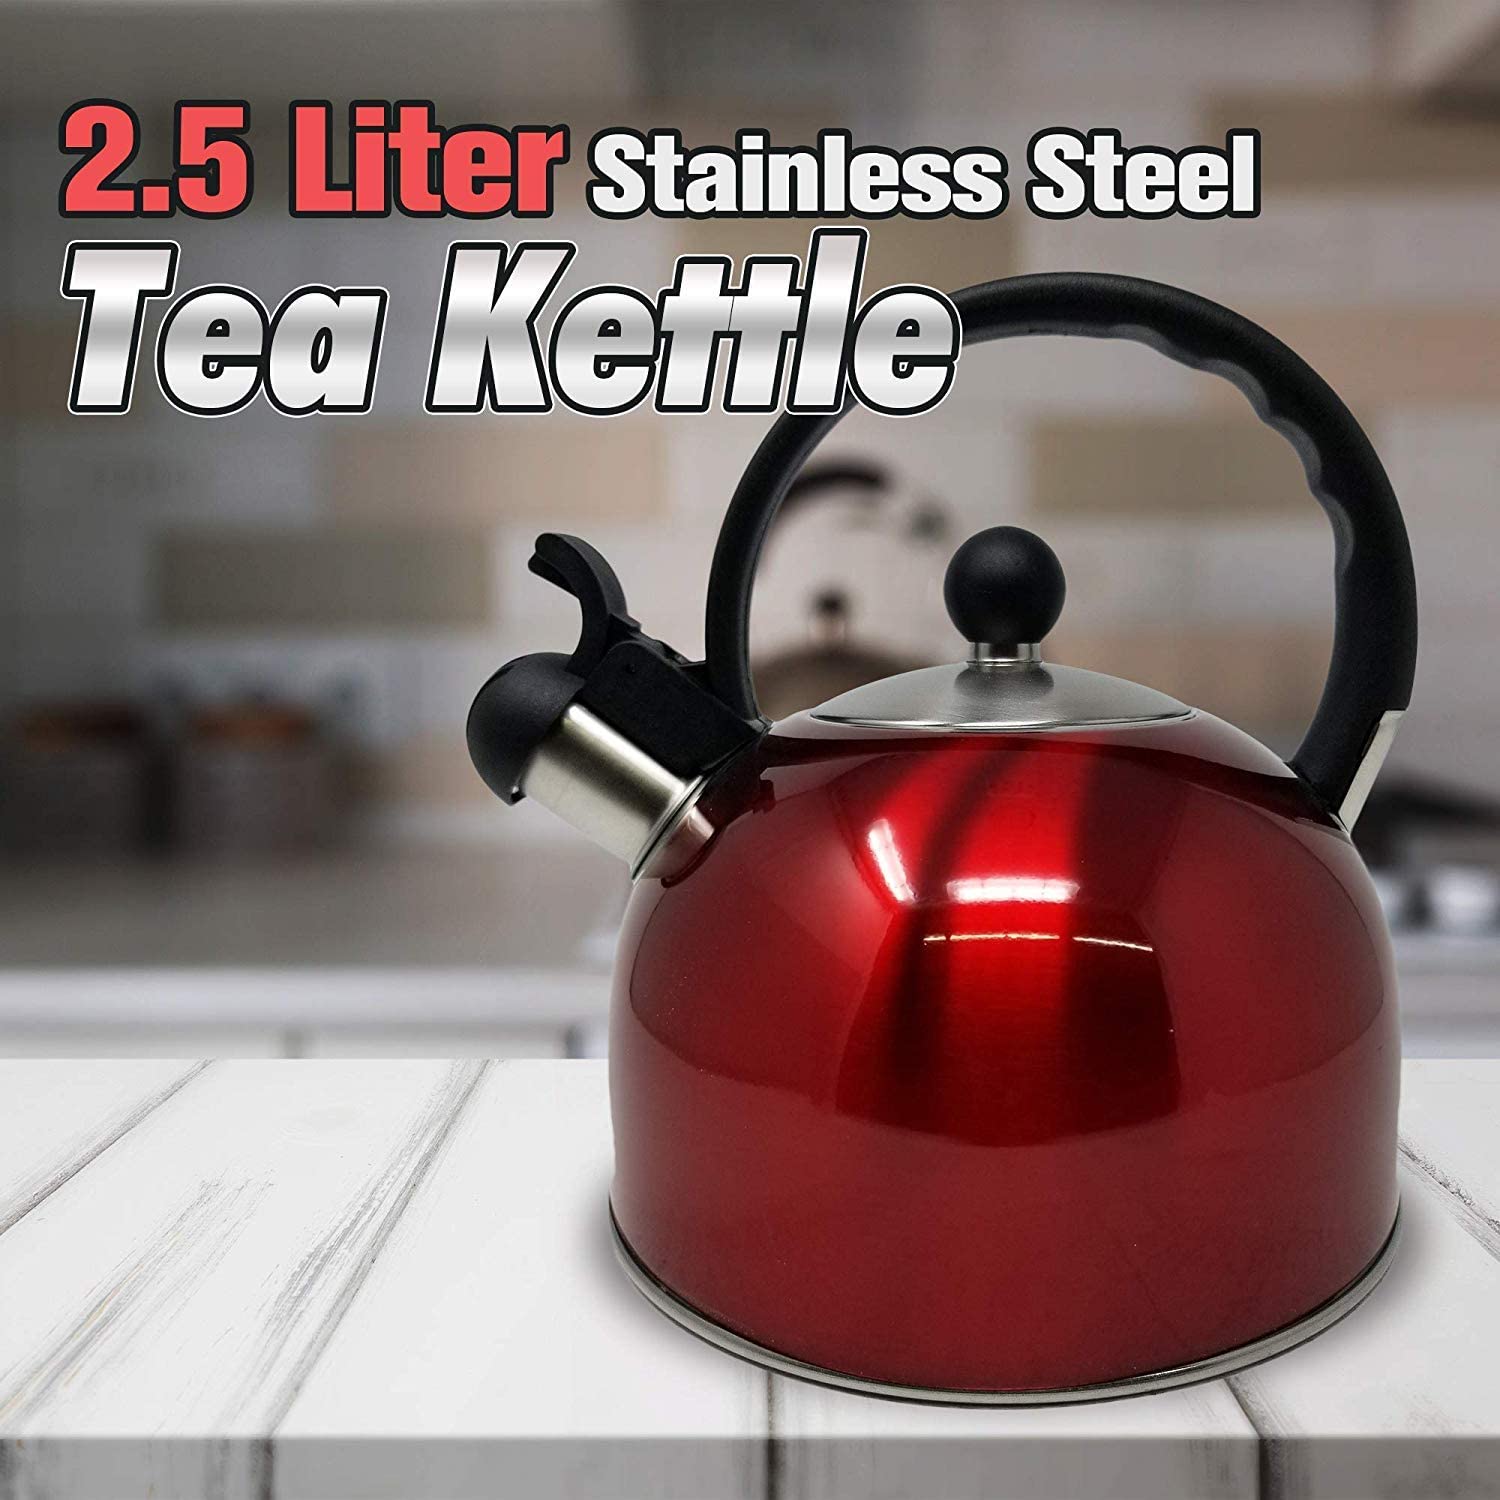 Stainless Steel Whistling Tea Kettle,2.5 Liters on Induction Stove,Gas Stove  Top